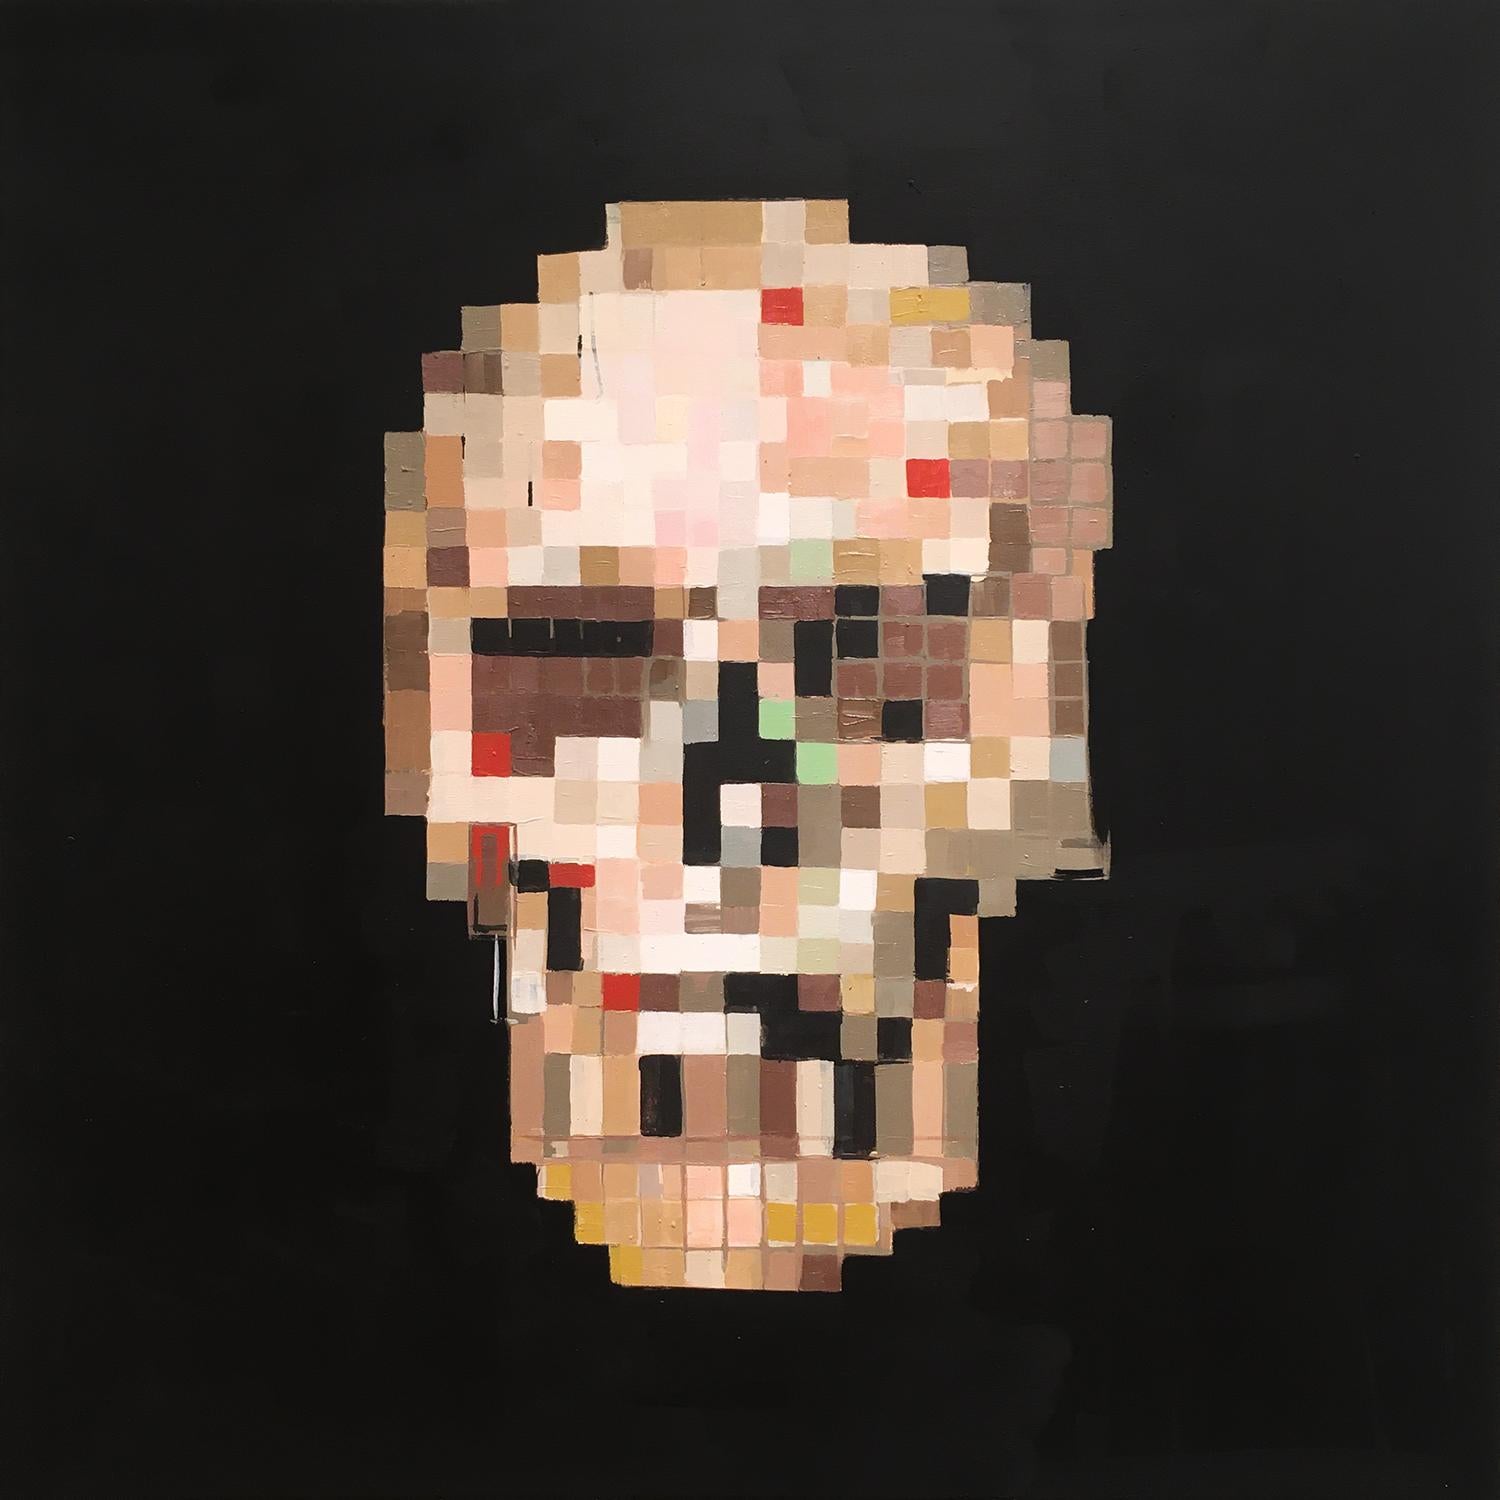 Robert Hightower Abstract Painting - 'Omega I' - Contemporary Geometric Abstraction Pixelation - Skull - Bosch